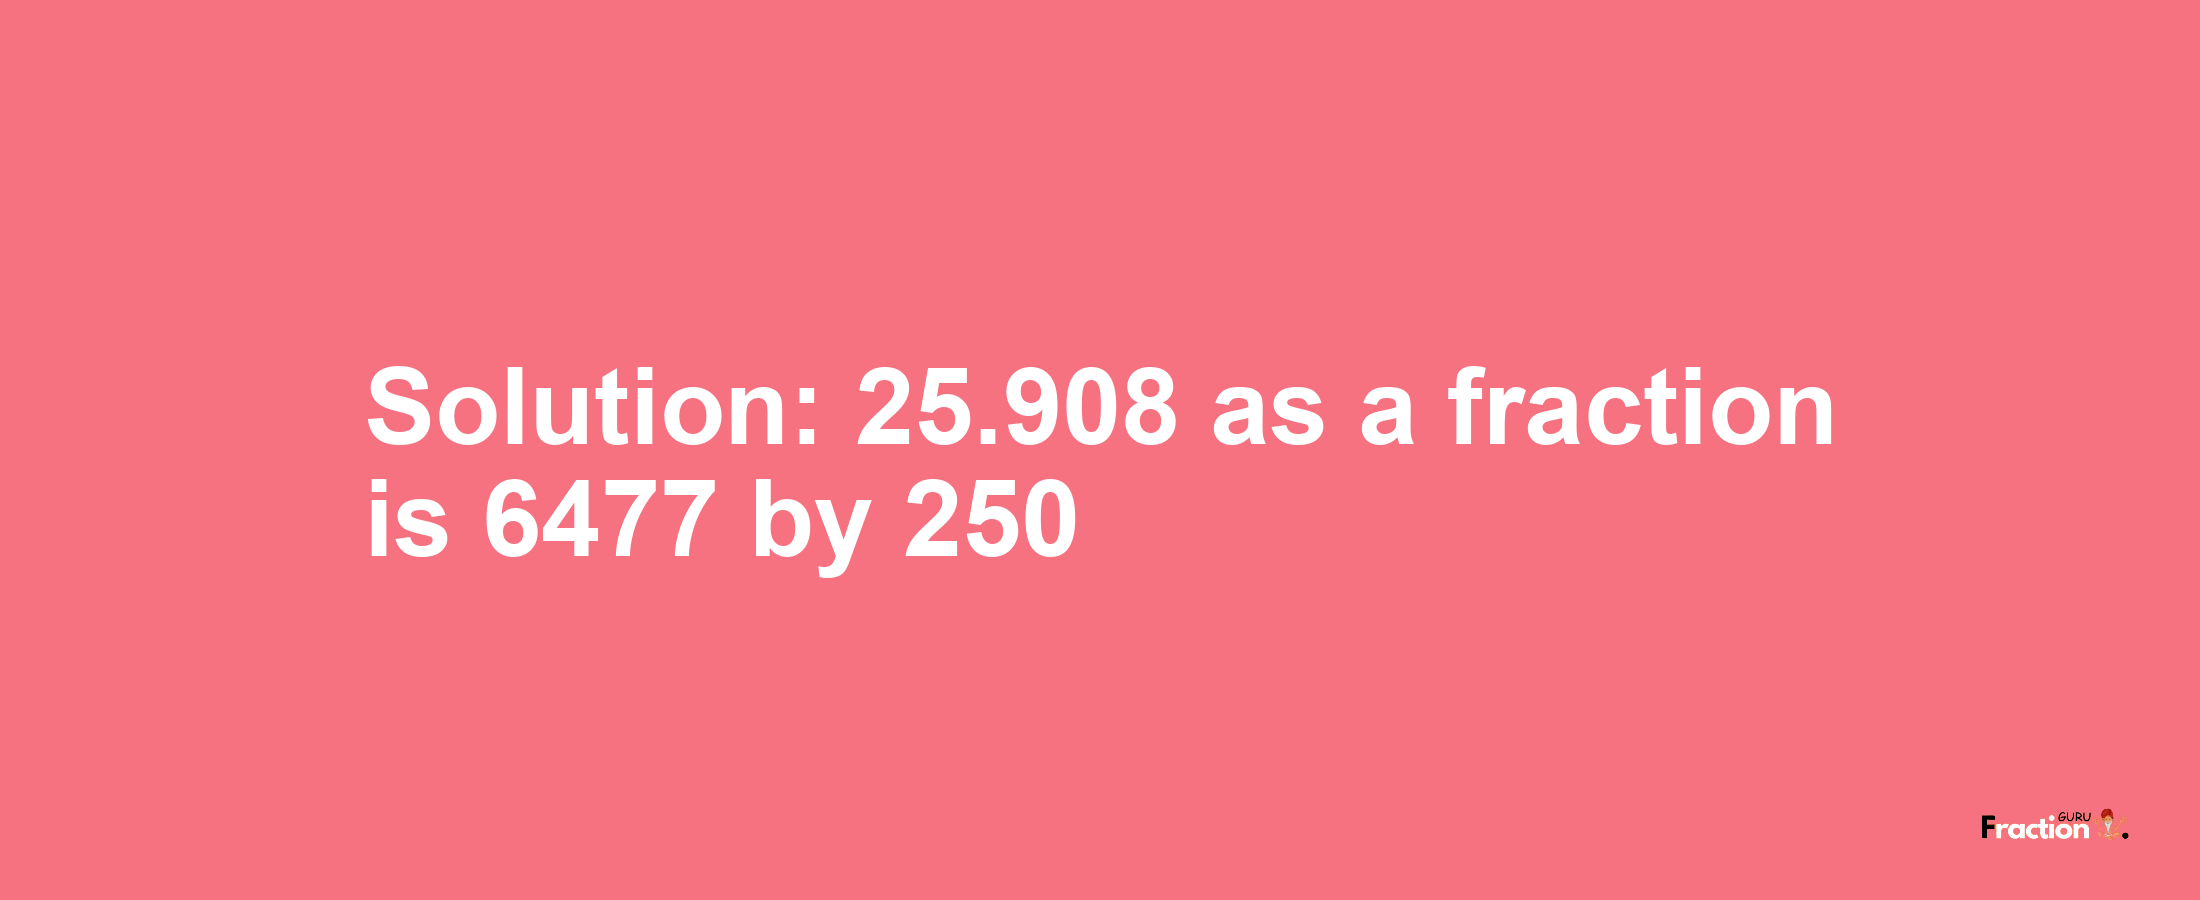 Solution:25.908 as a fraction is 6477/250